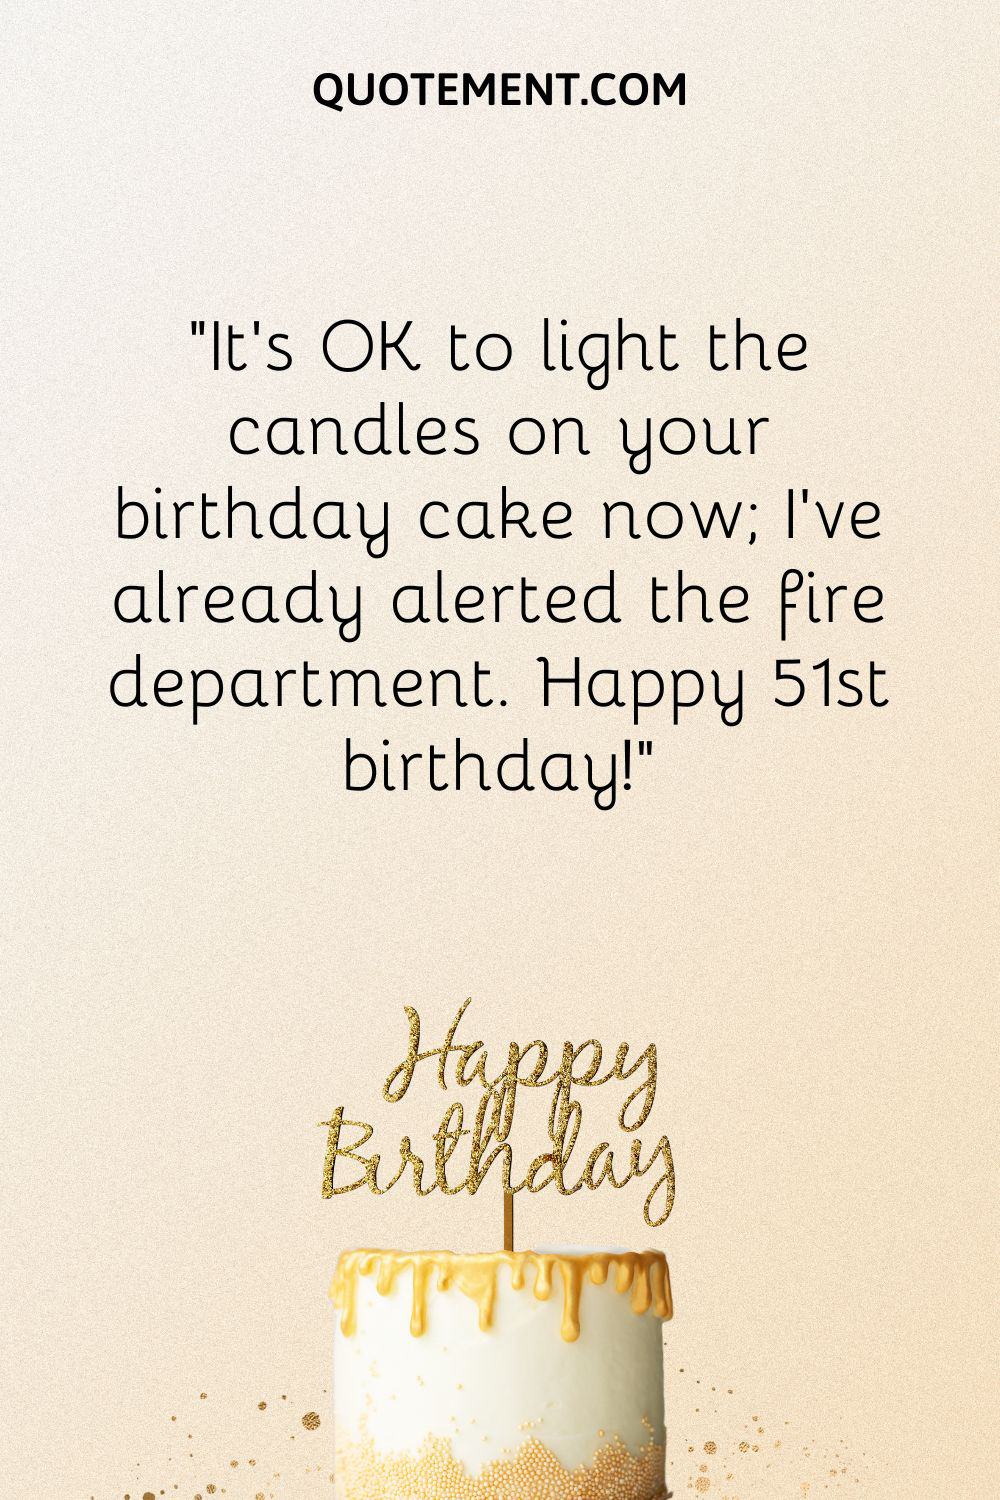 It's OK to light the candles on your birthday cake now